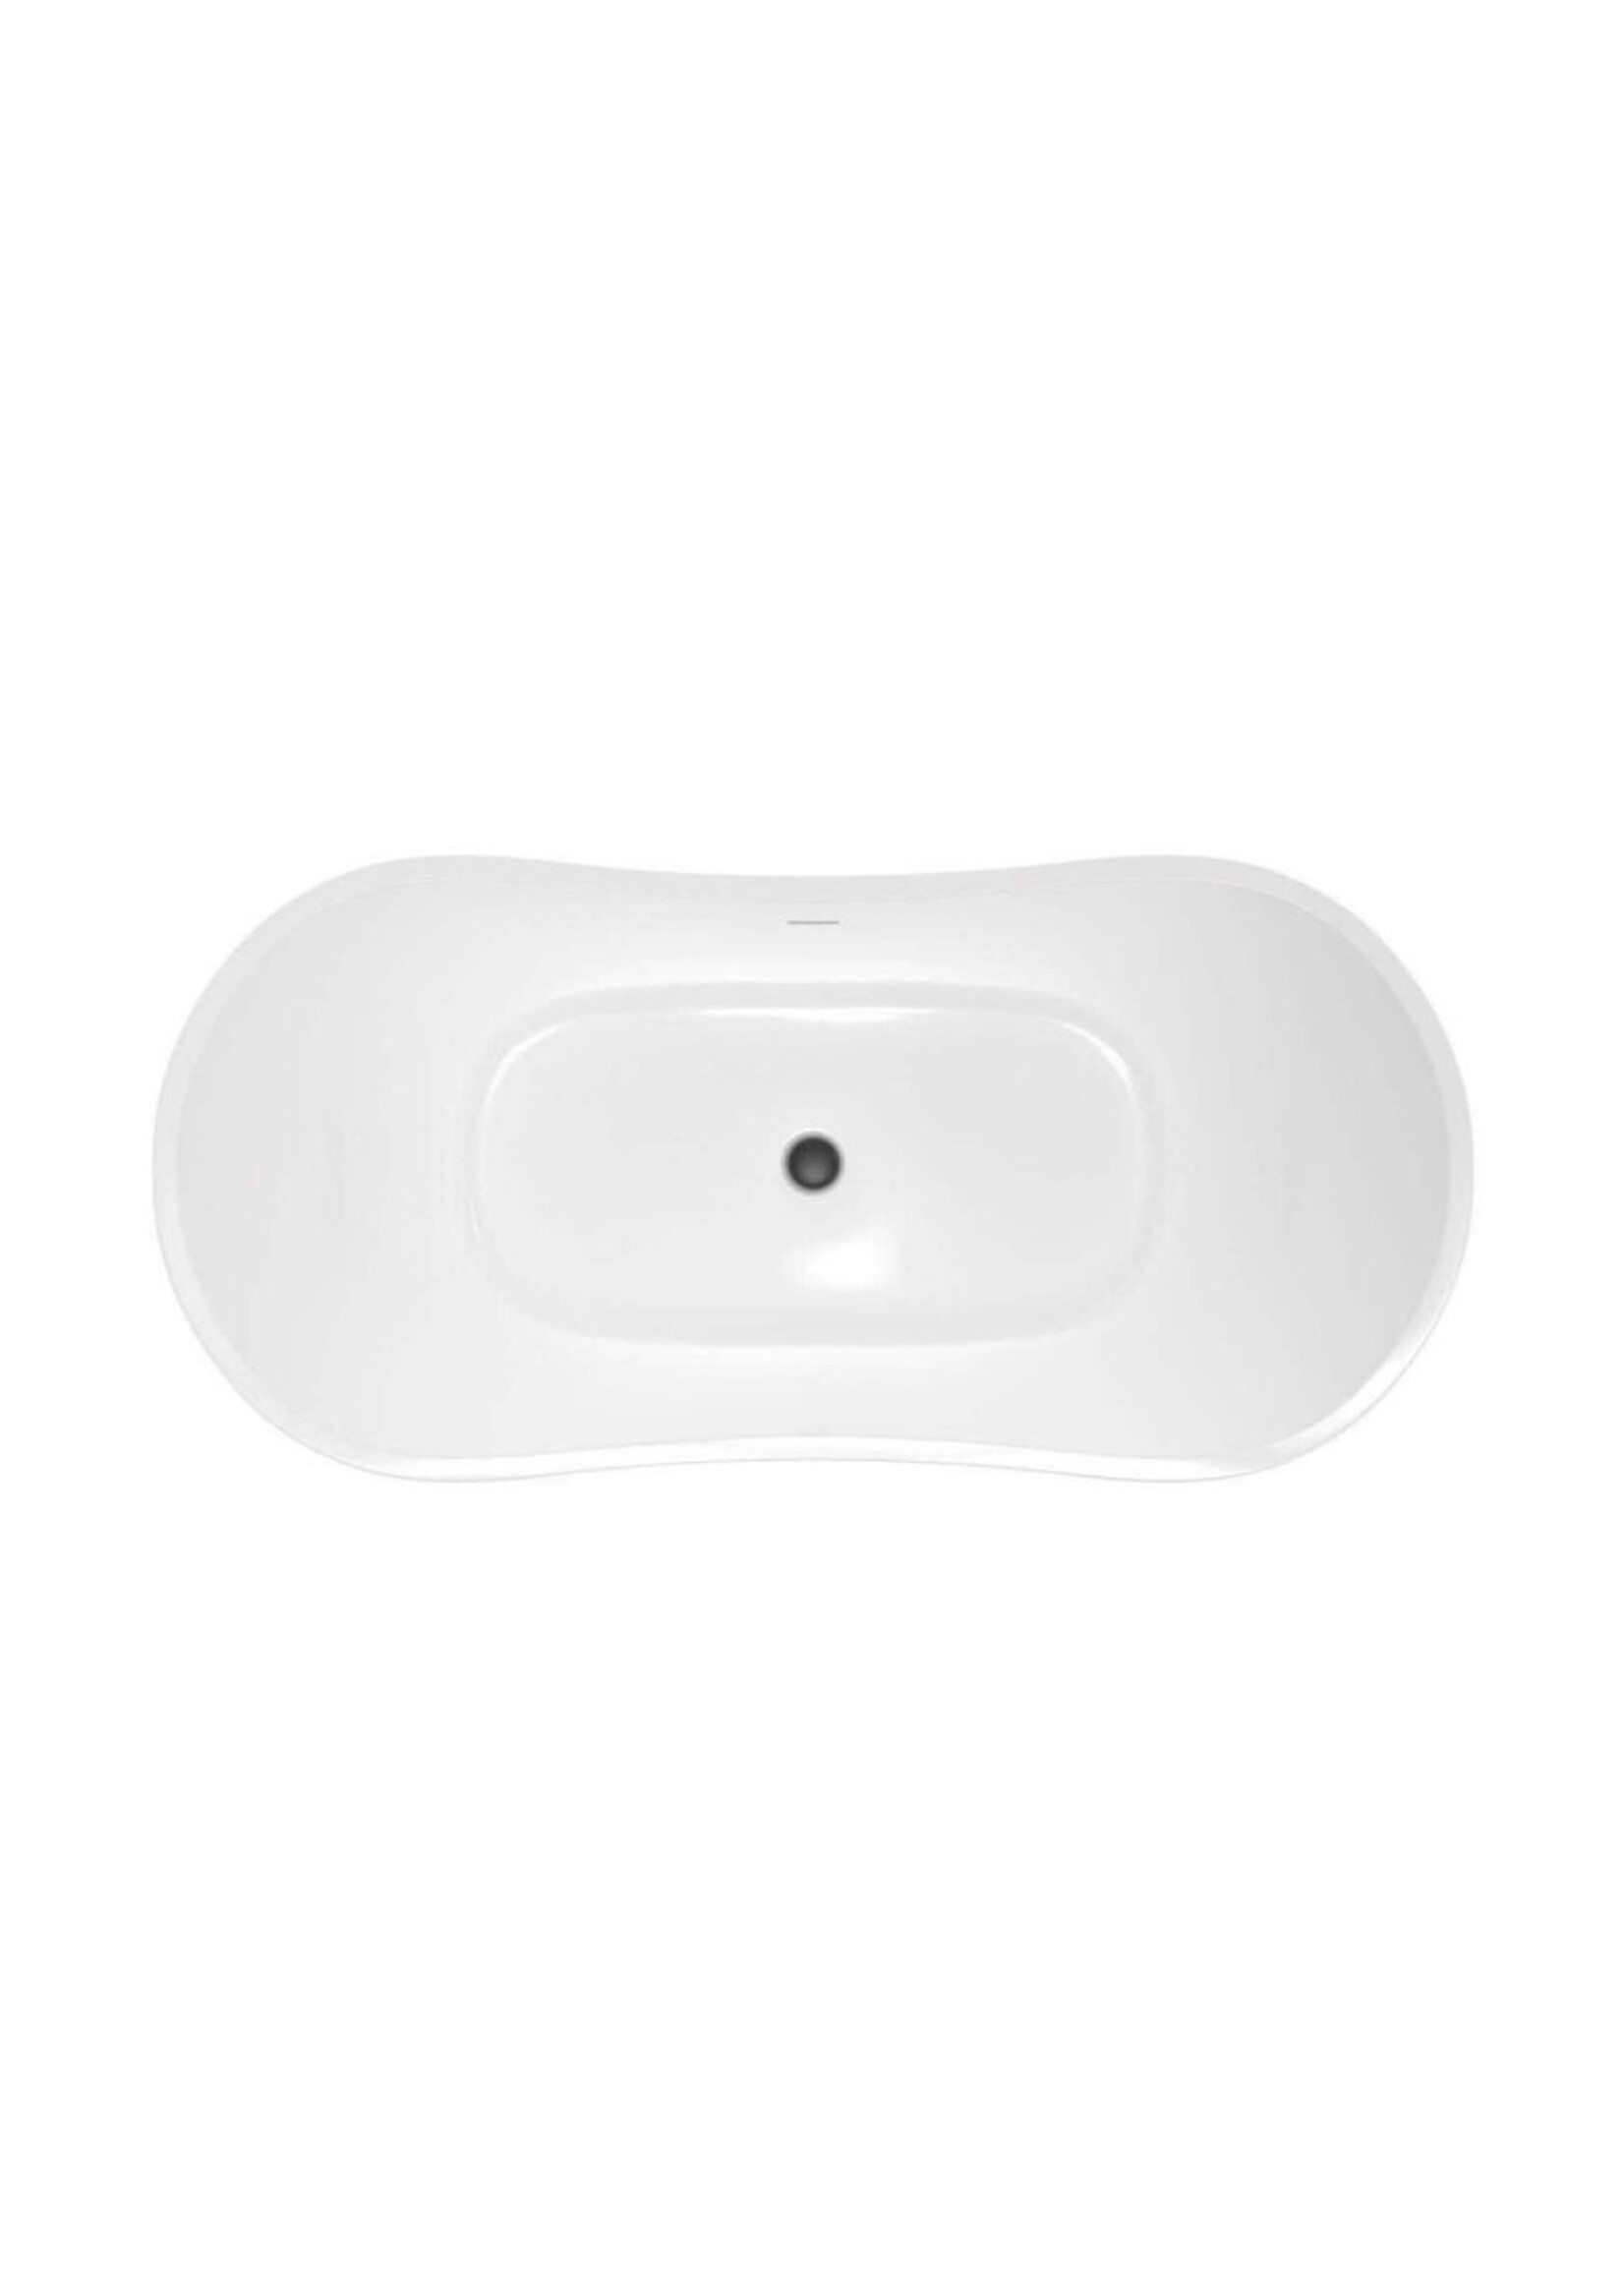 MaidStone Maidstone Millie 59" Freestanding slipper tub white only  slotted overflow (trim color TBD)